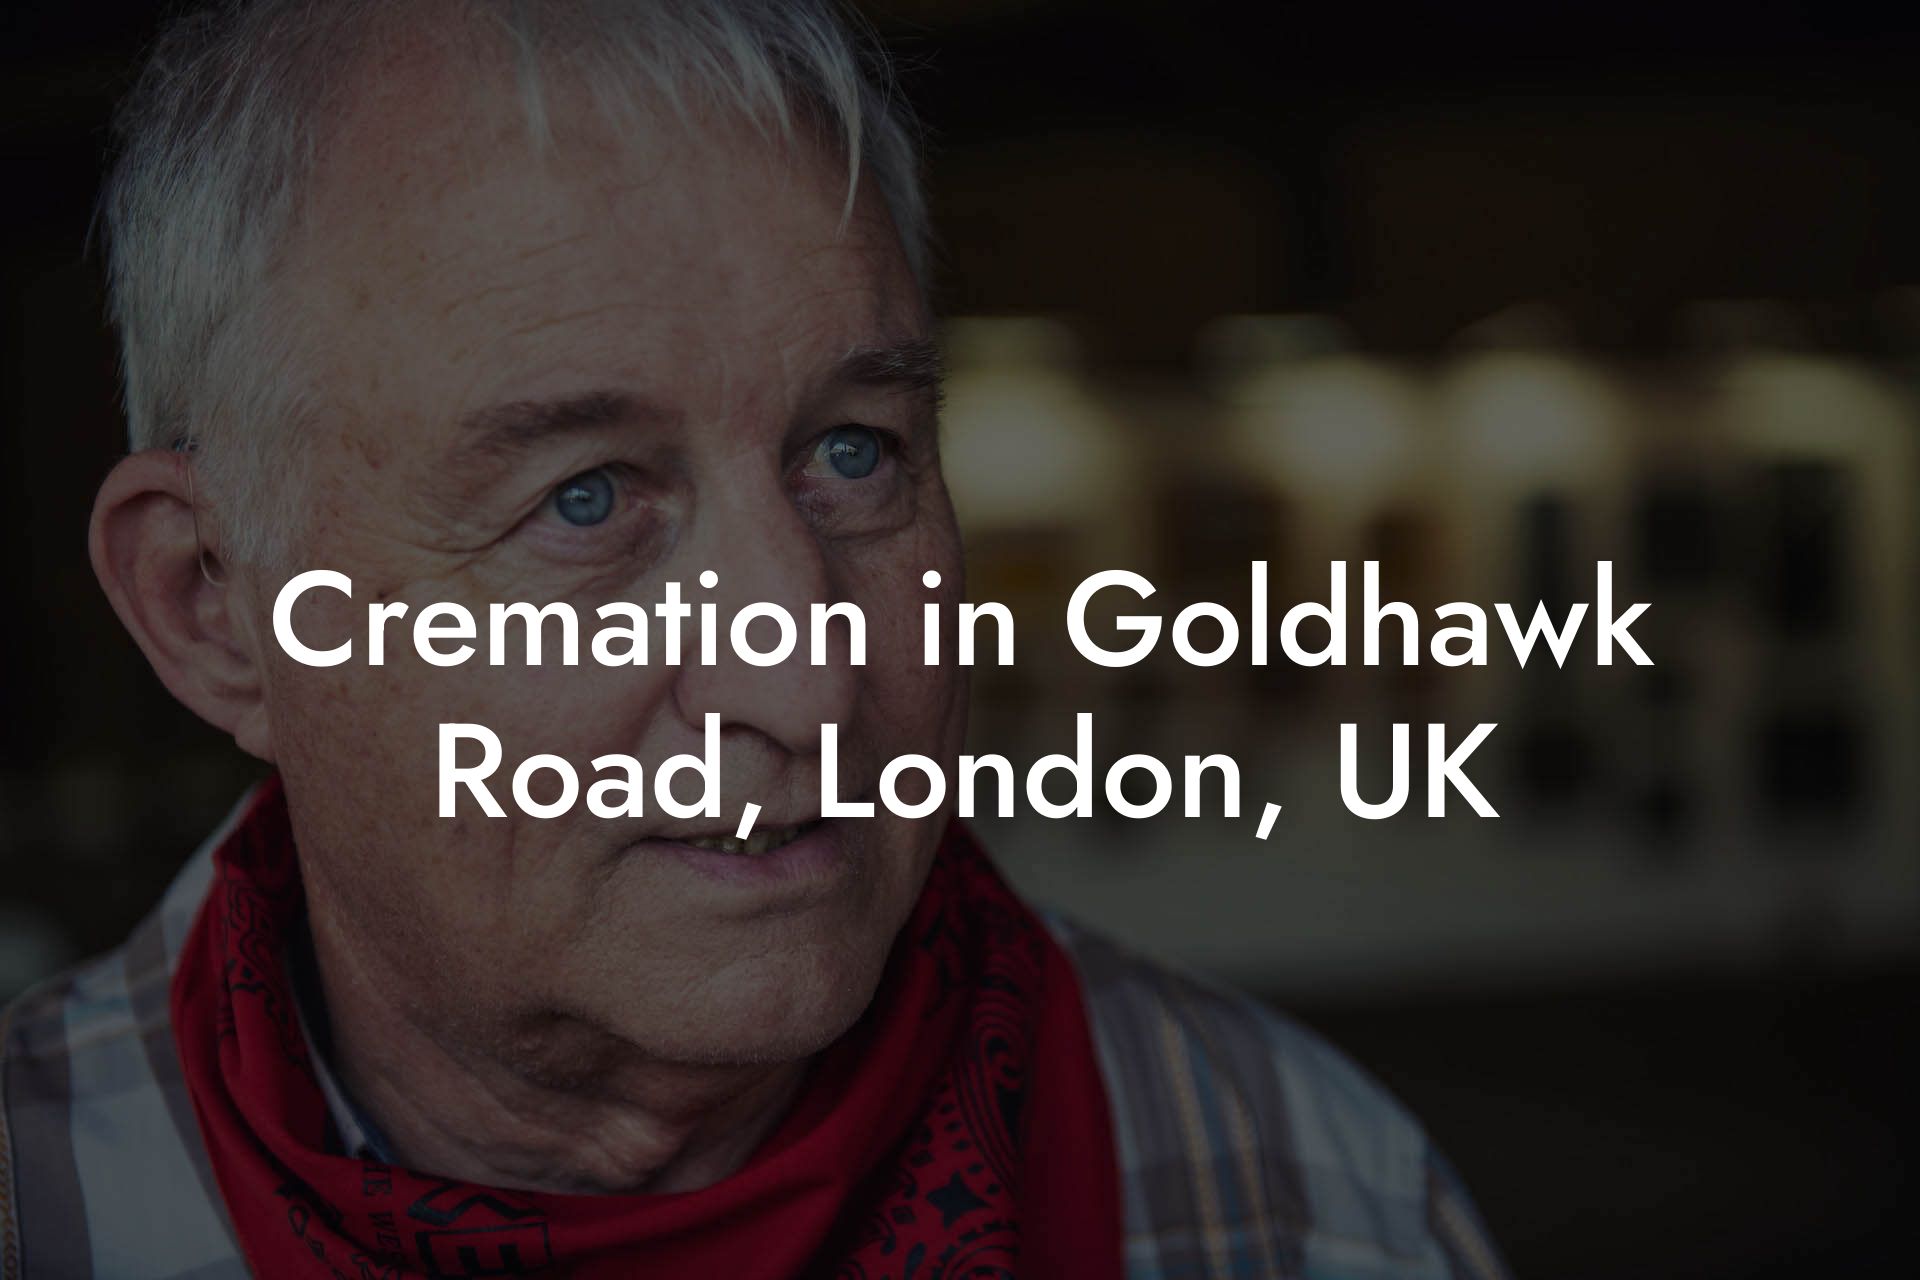 Cremation in Goldhawk Road, London, UK